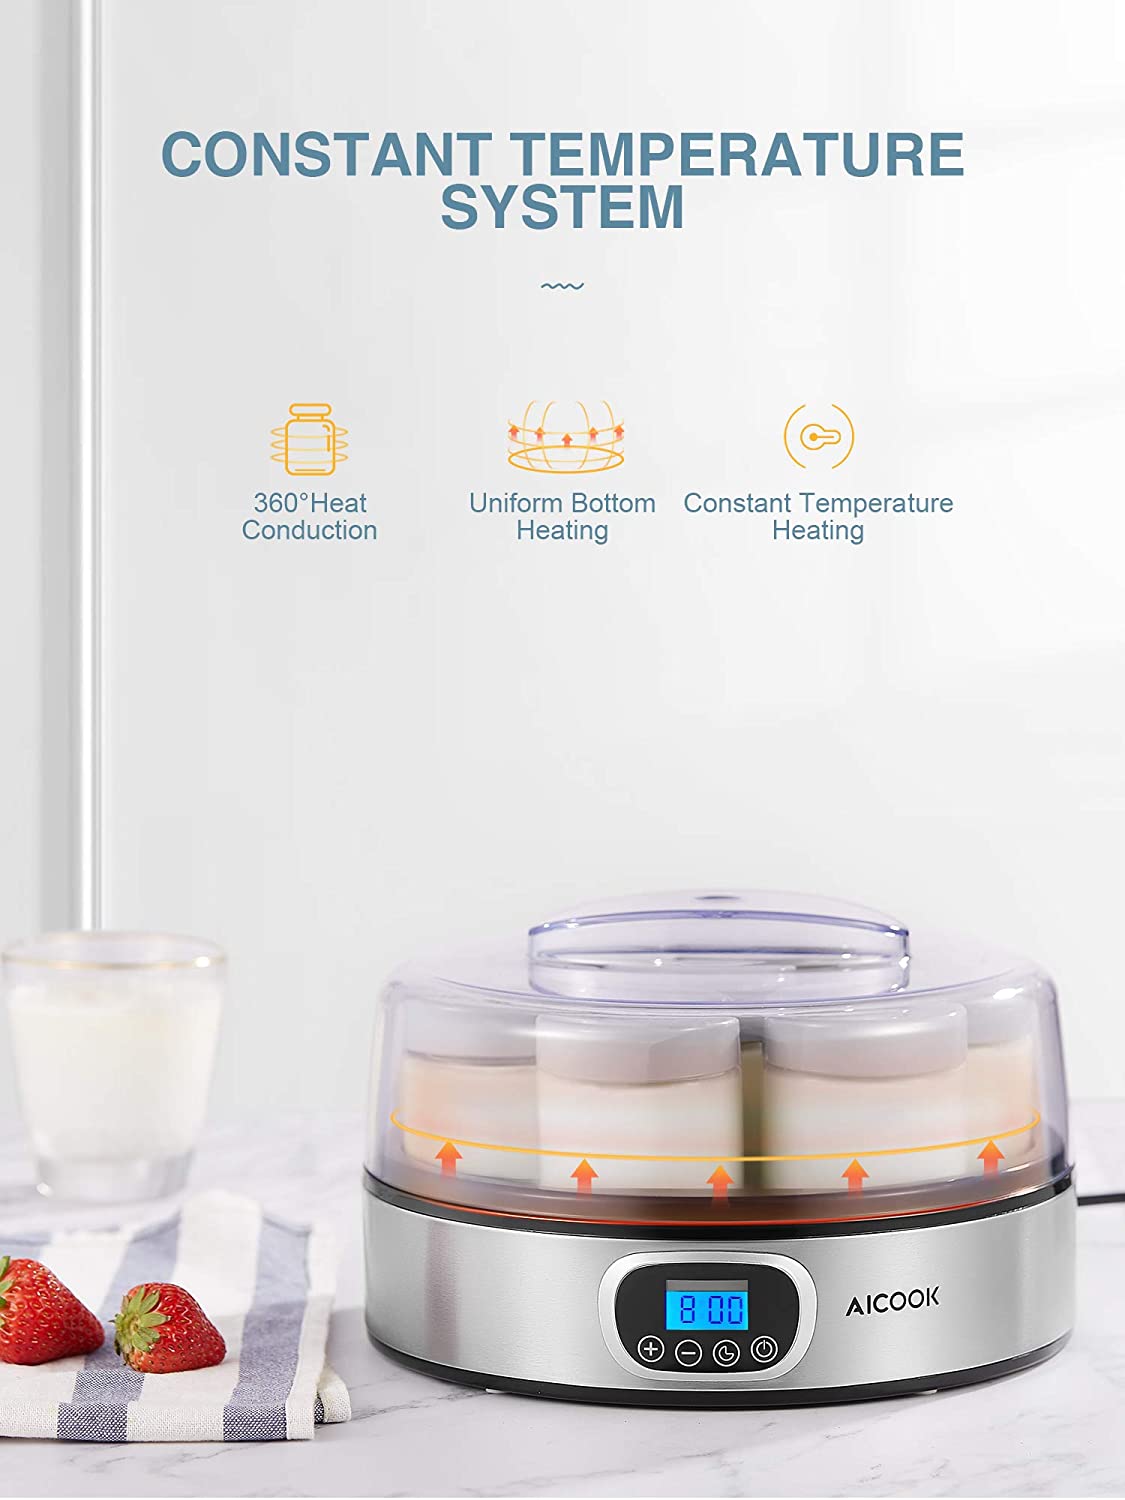 AICOOK | Yogurt Maker, Automatic Digital Yogurt Maker Machine with Timer Control & LCD Display, Stainless Steel Body, Constant Temperature System